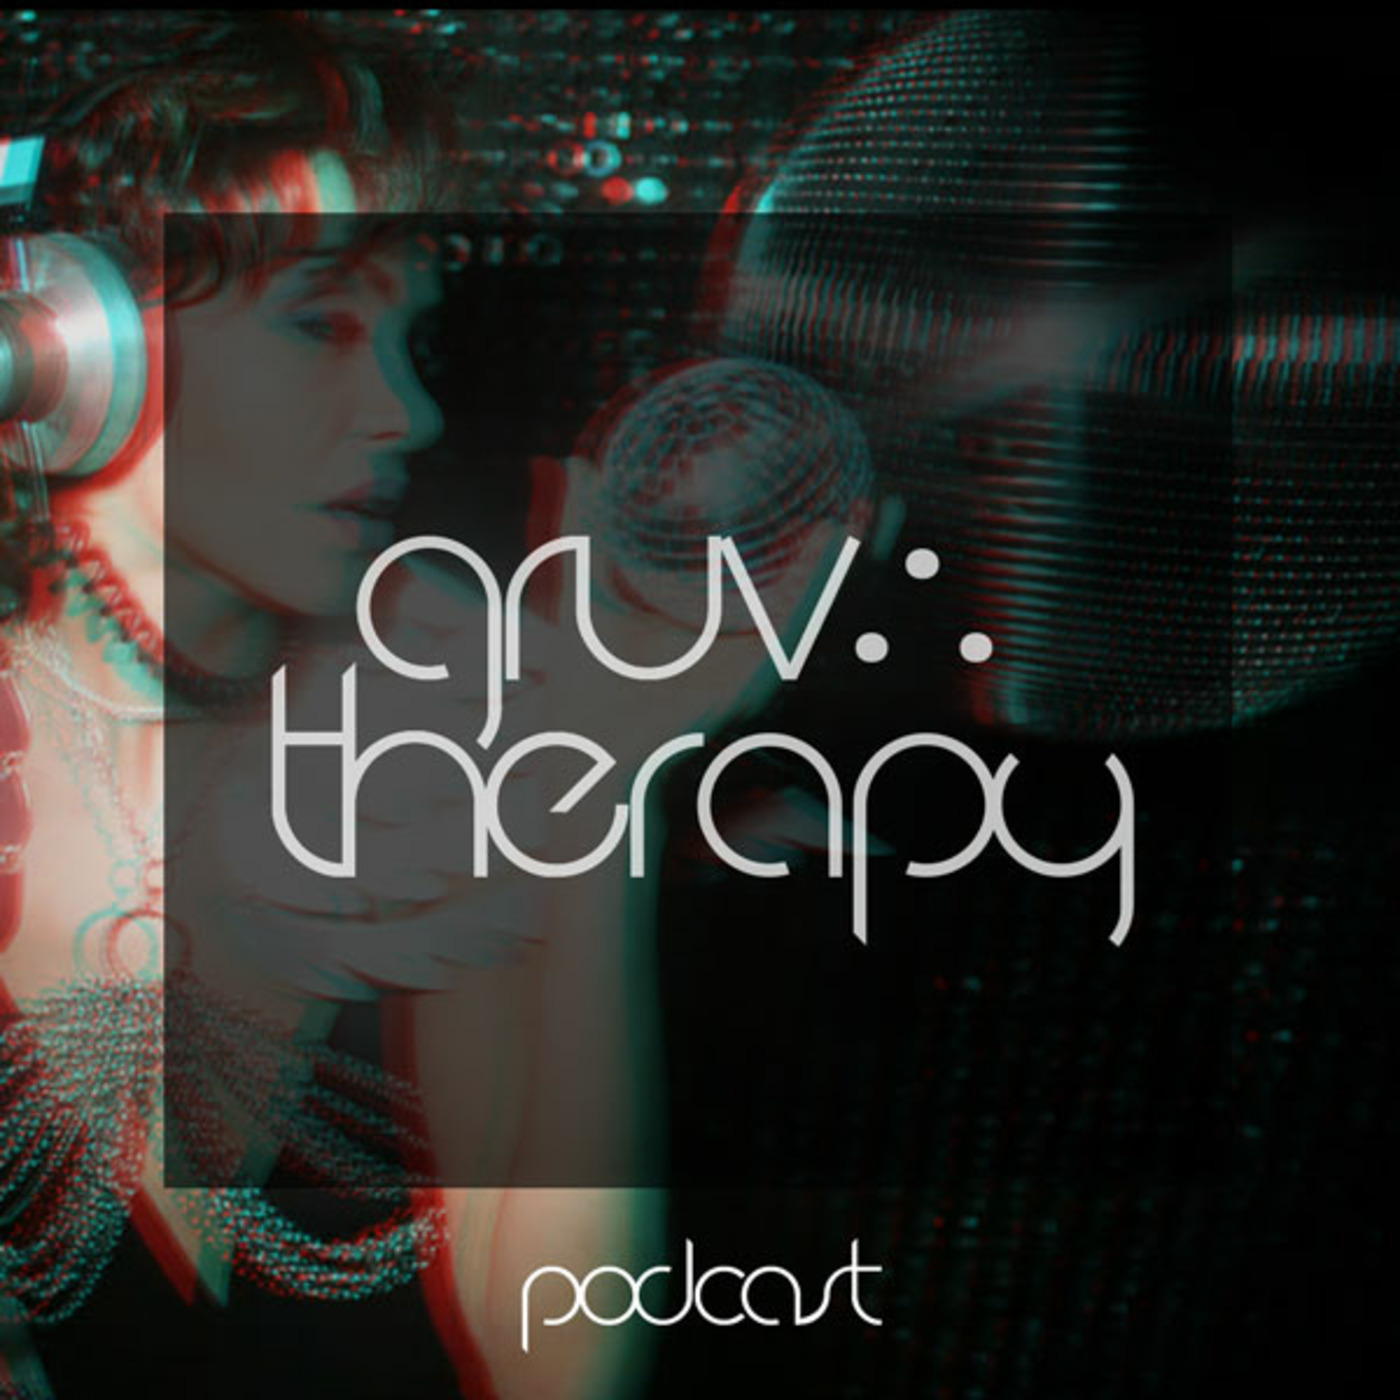 Angel Manuel presents Gruv Therapy